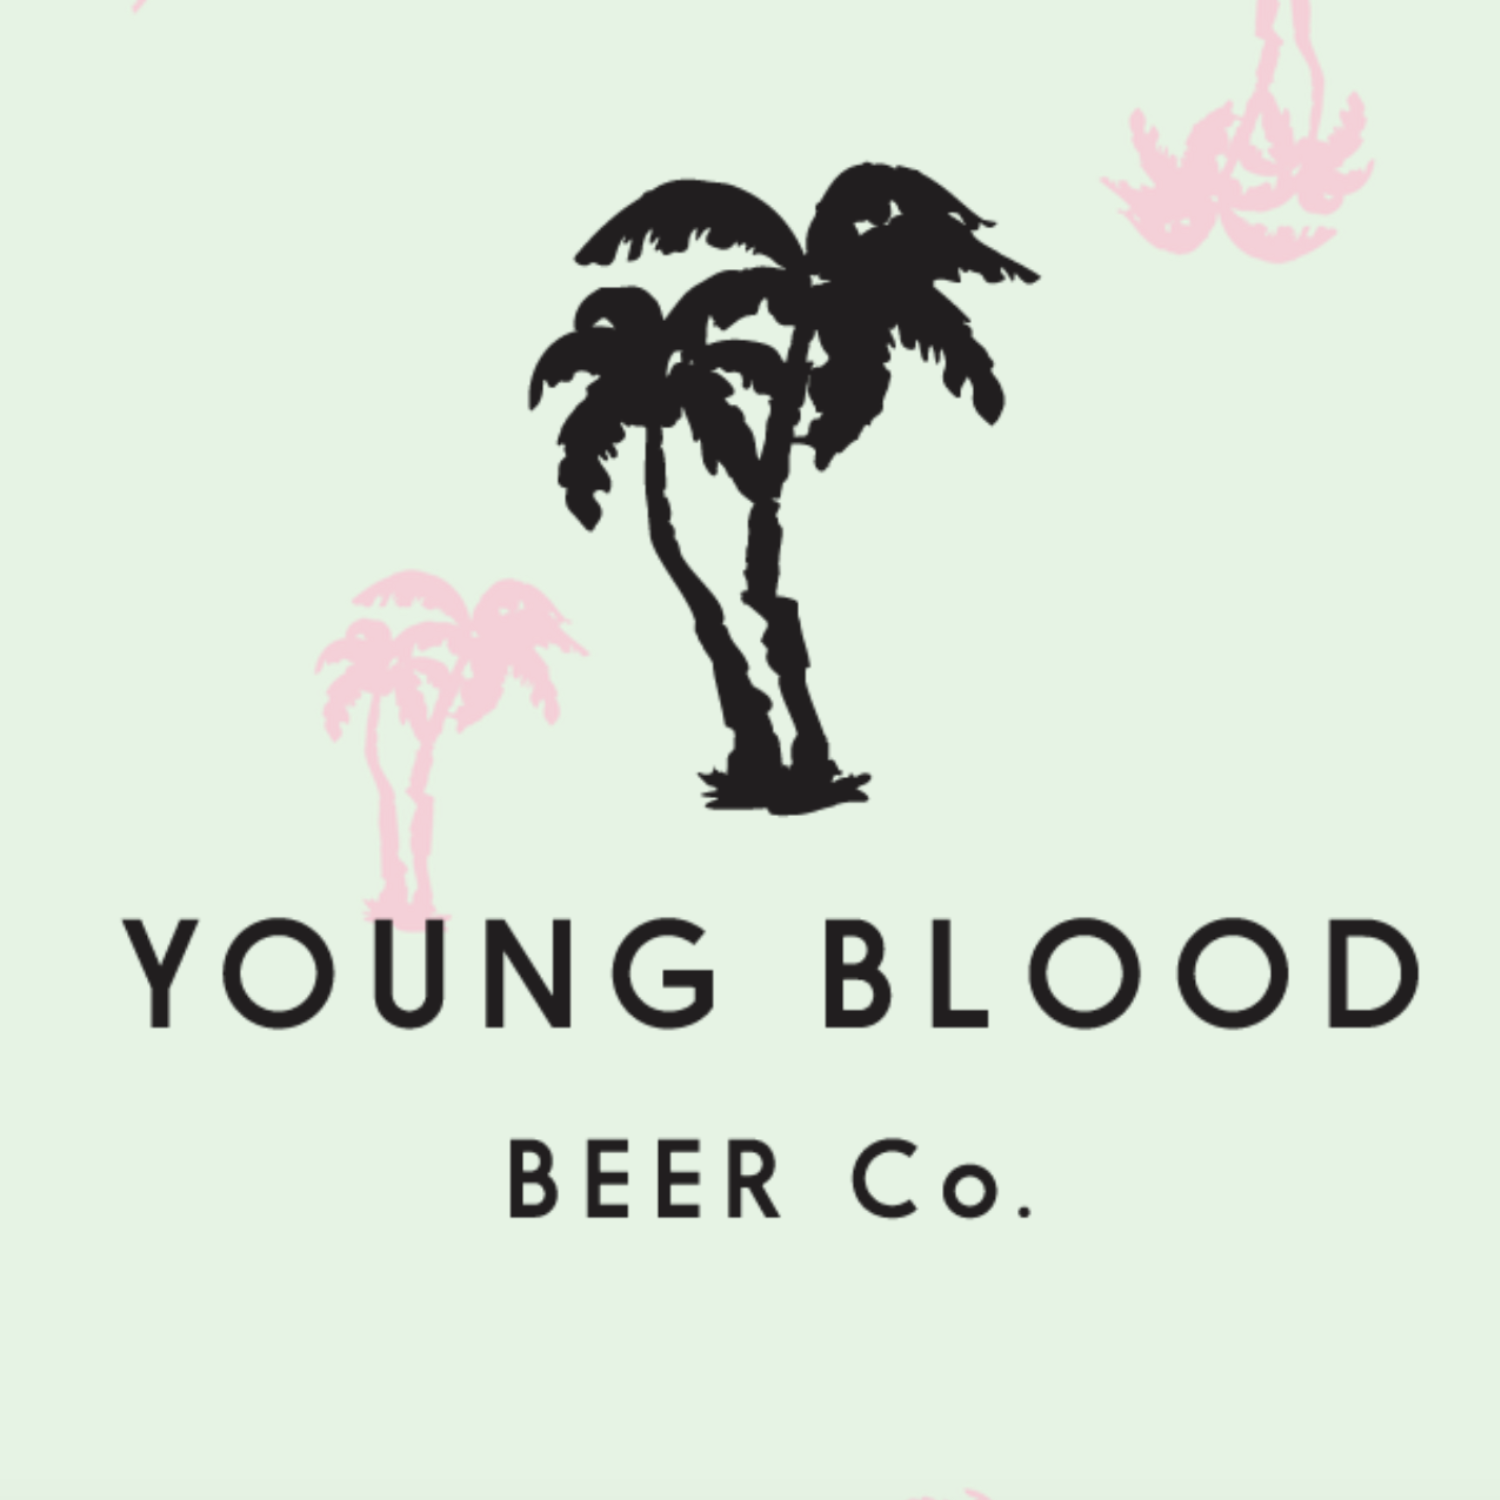 Young Blood Beer Co. - A.C. Slater Vibes